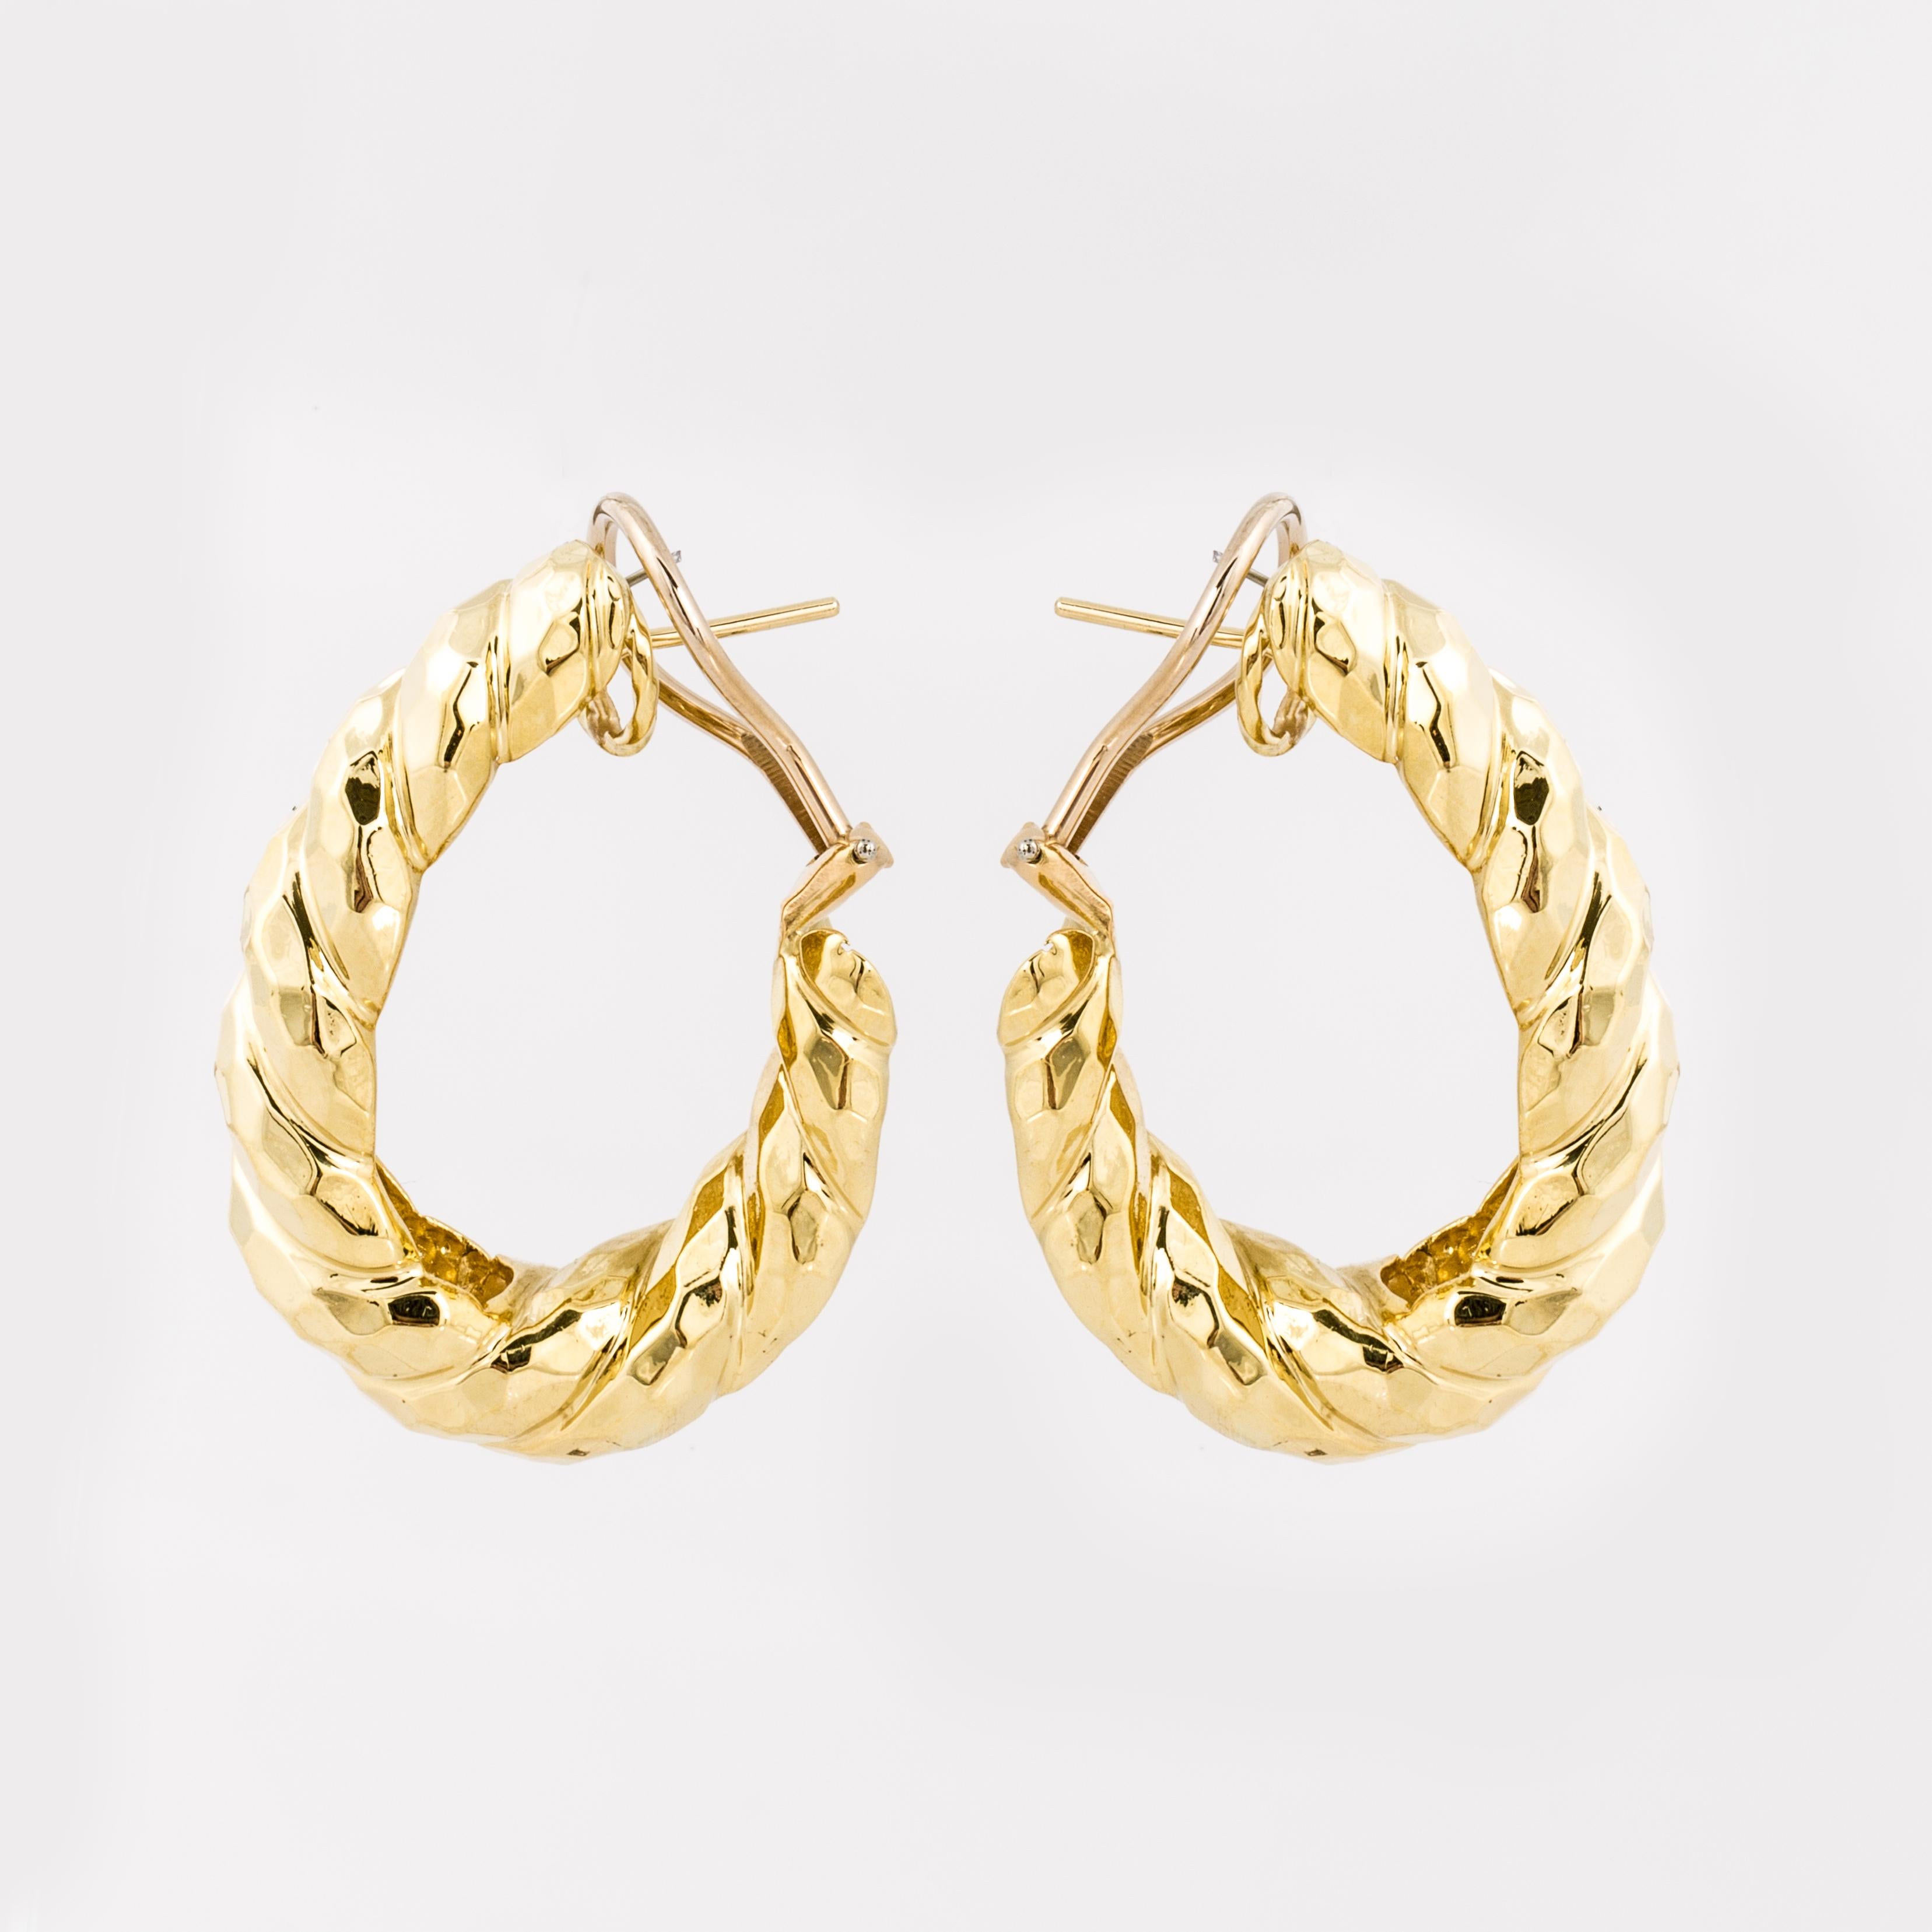 Henry Dunay hoop earrings composed of 18K yellow hammered twisted gold.  They measure 1 3/8 inches long by 5/16 inches wide and 1 inch deep.  The earrings have an omega clip back with a post.